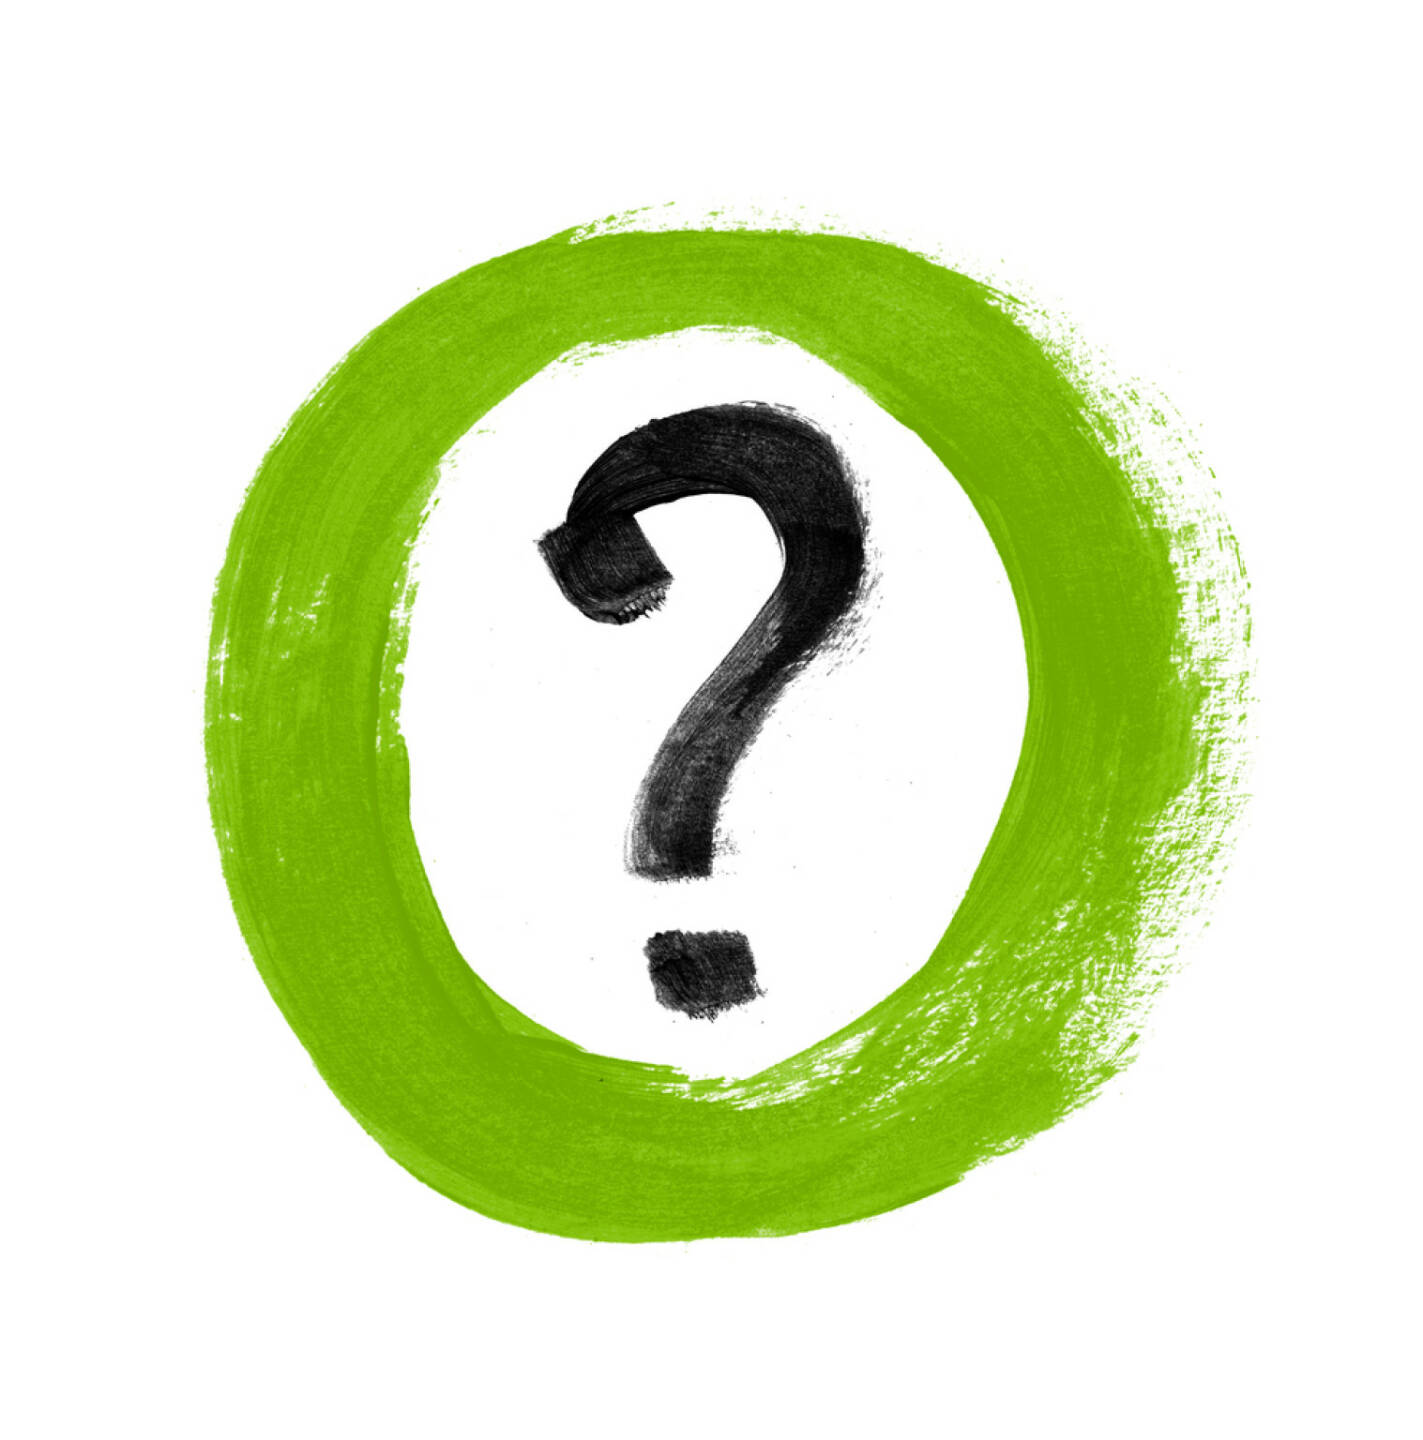 Frage, Fragezeichen - http://www.shutterstock.com/de/pic-110941199/stock-photo-green-hand-painted-question-mark-sign-icon.html?